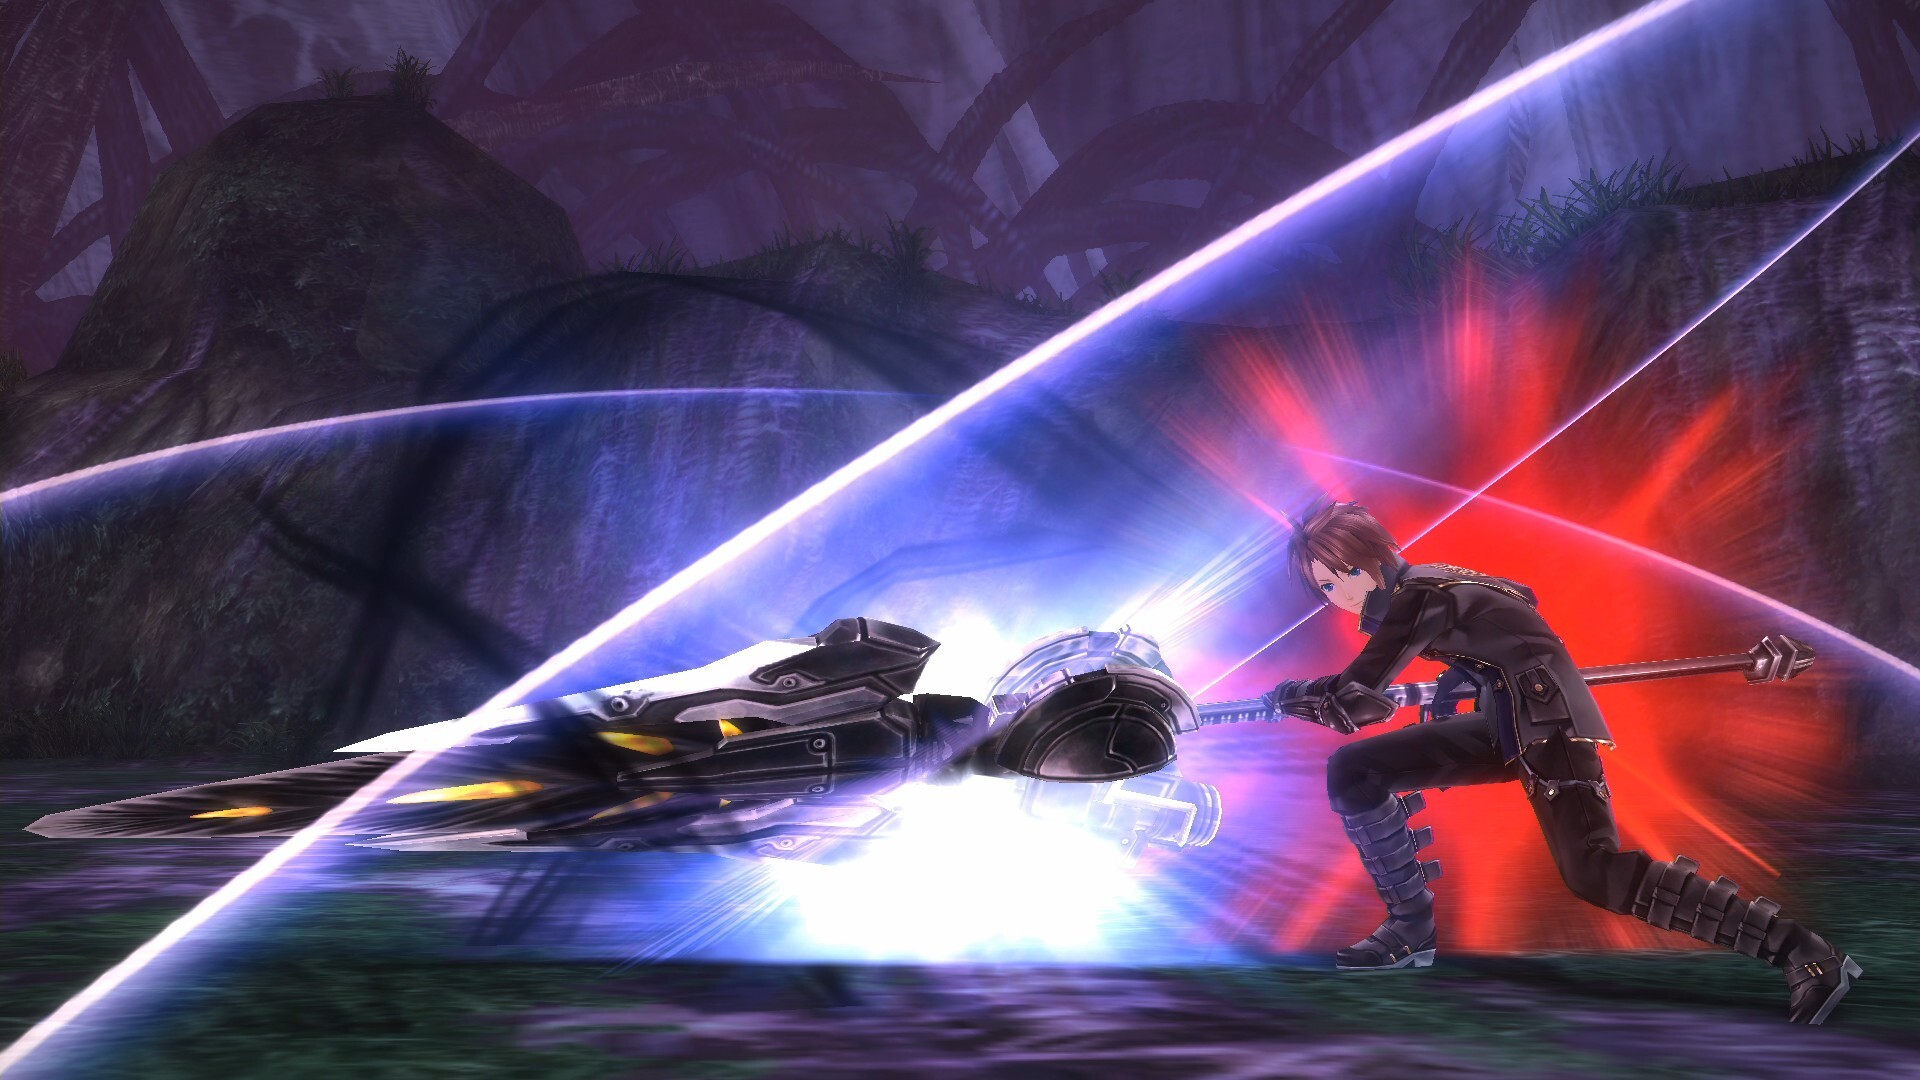 God Eater (Game): Rage Burst, Steam, A series of sci-fi action role-playing video games. 1920x1080 Full HD Background.